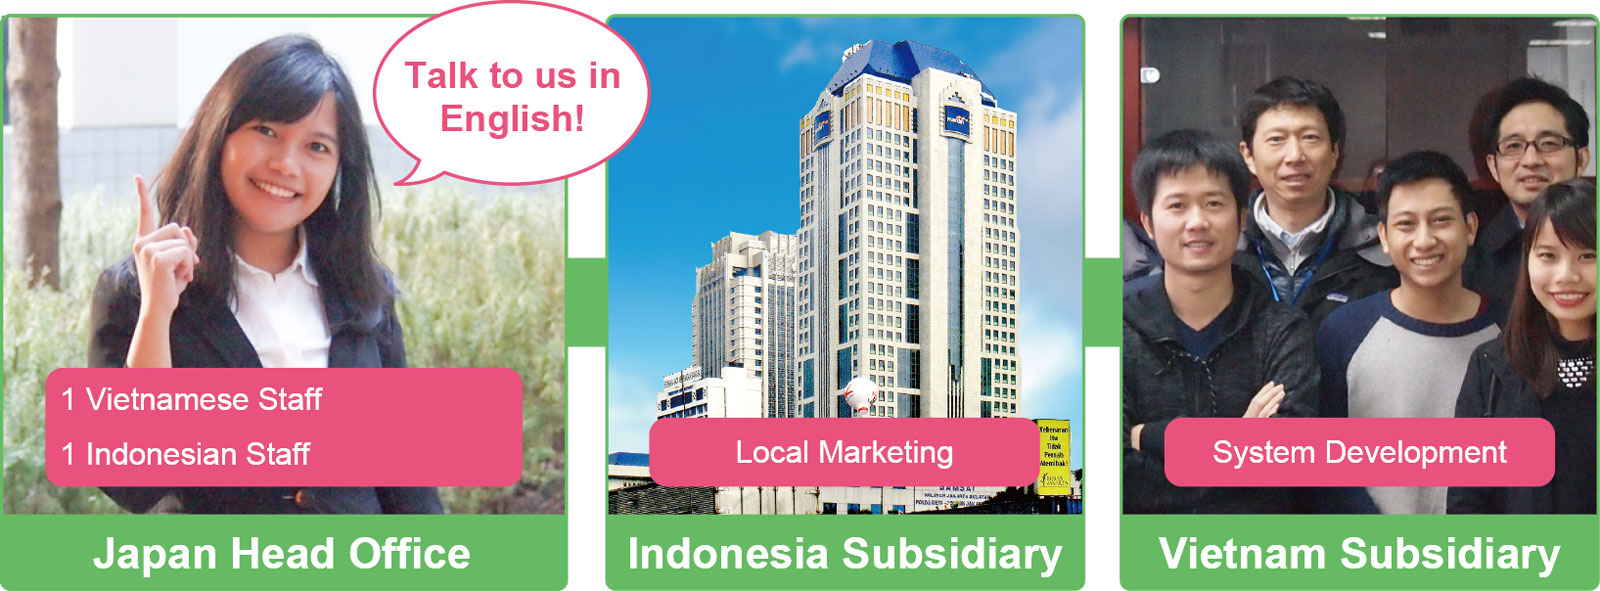 Talk to us in English! Subsidiary in Indonesia, subsidiary in Vietnam, Japan head office